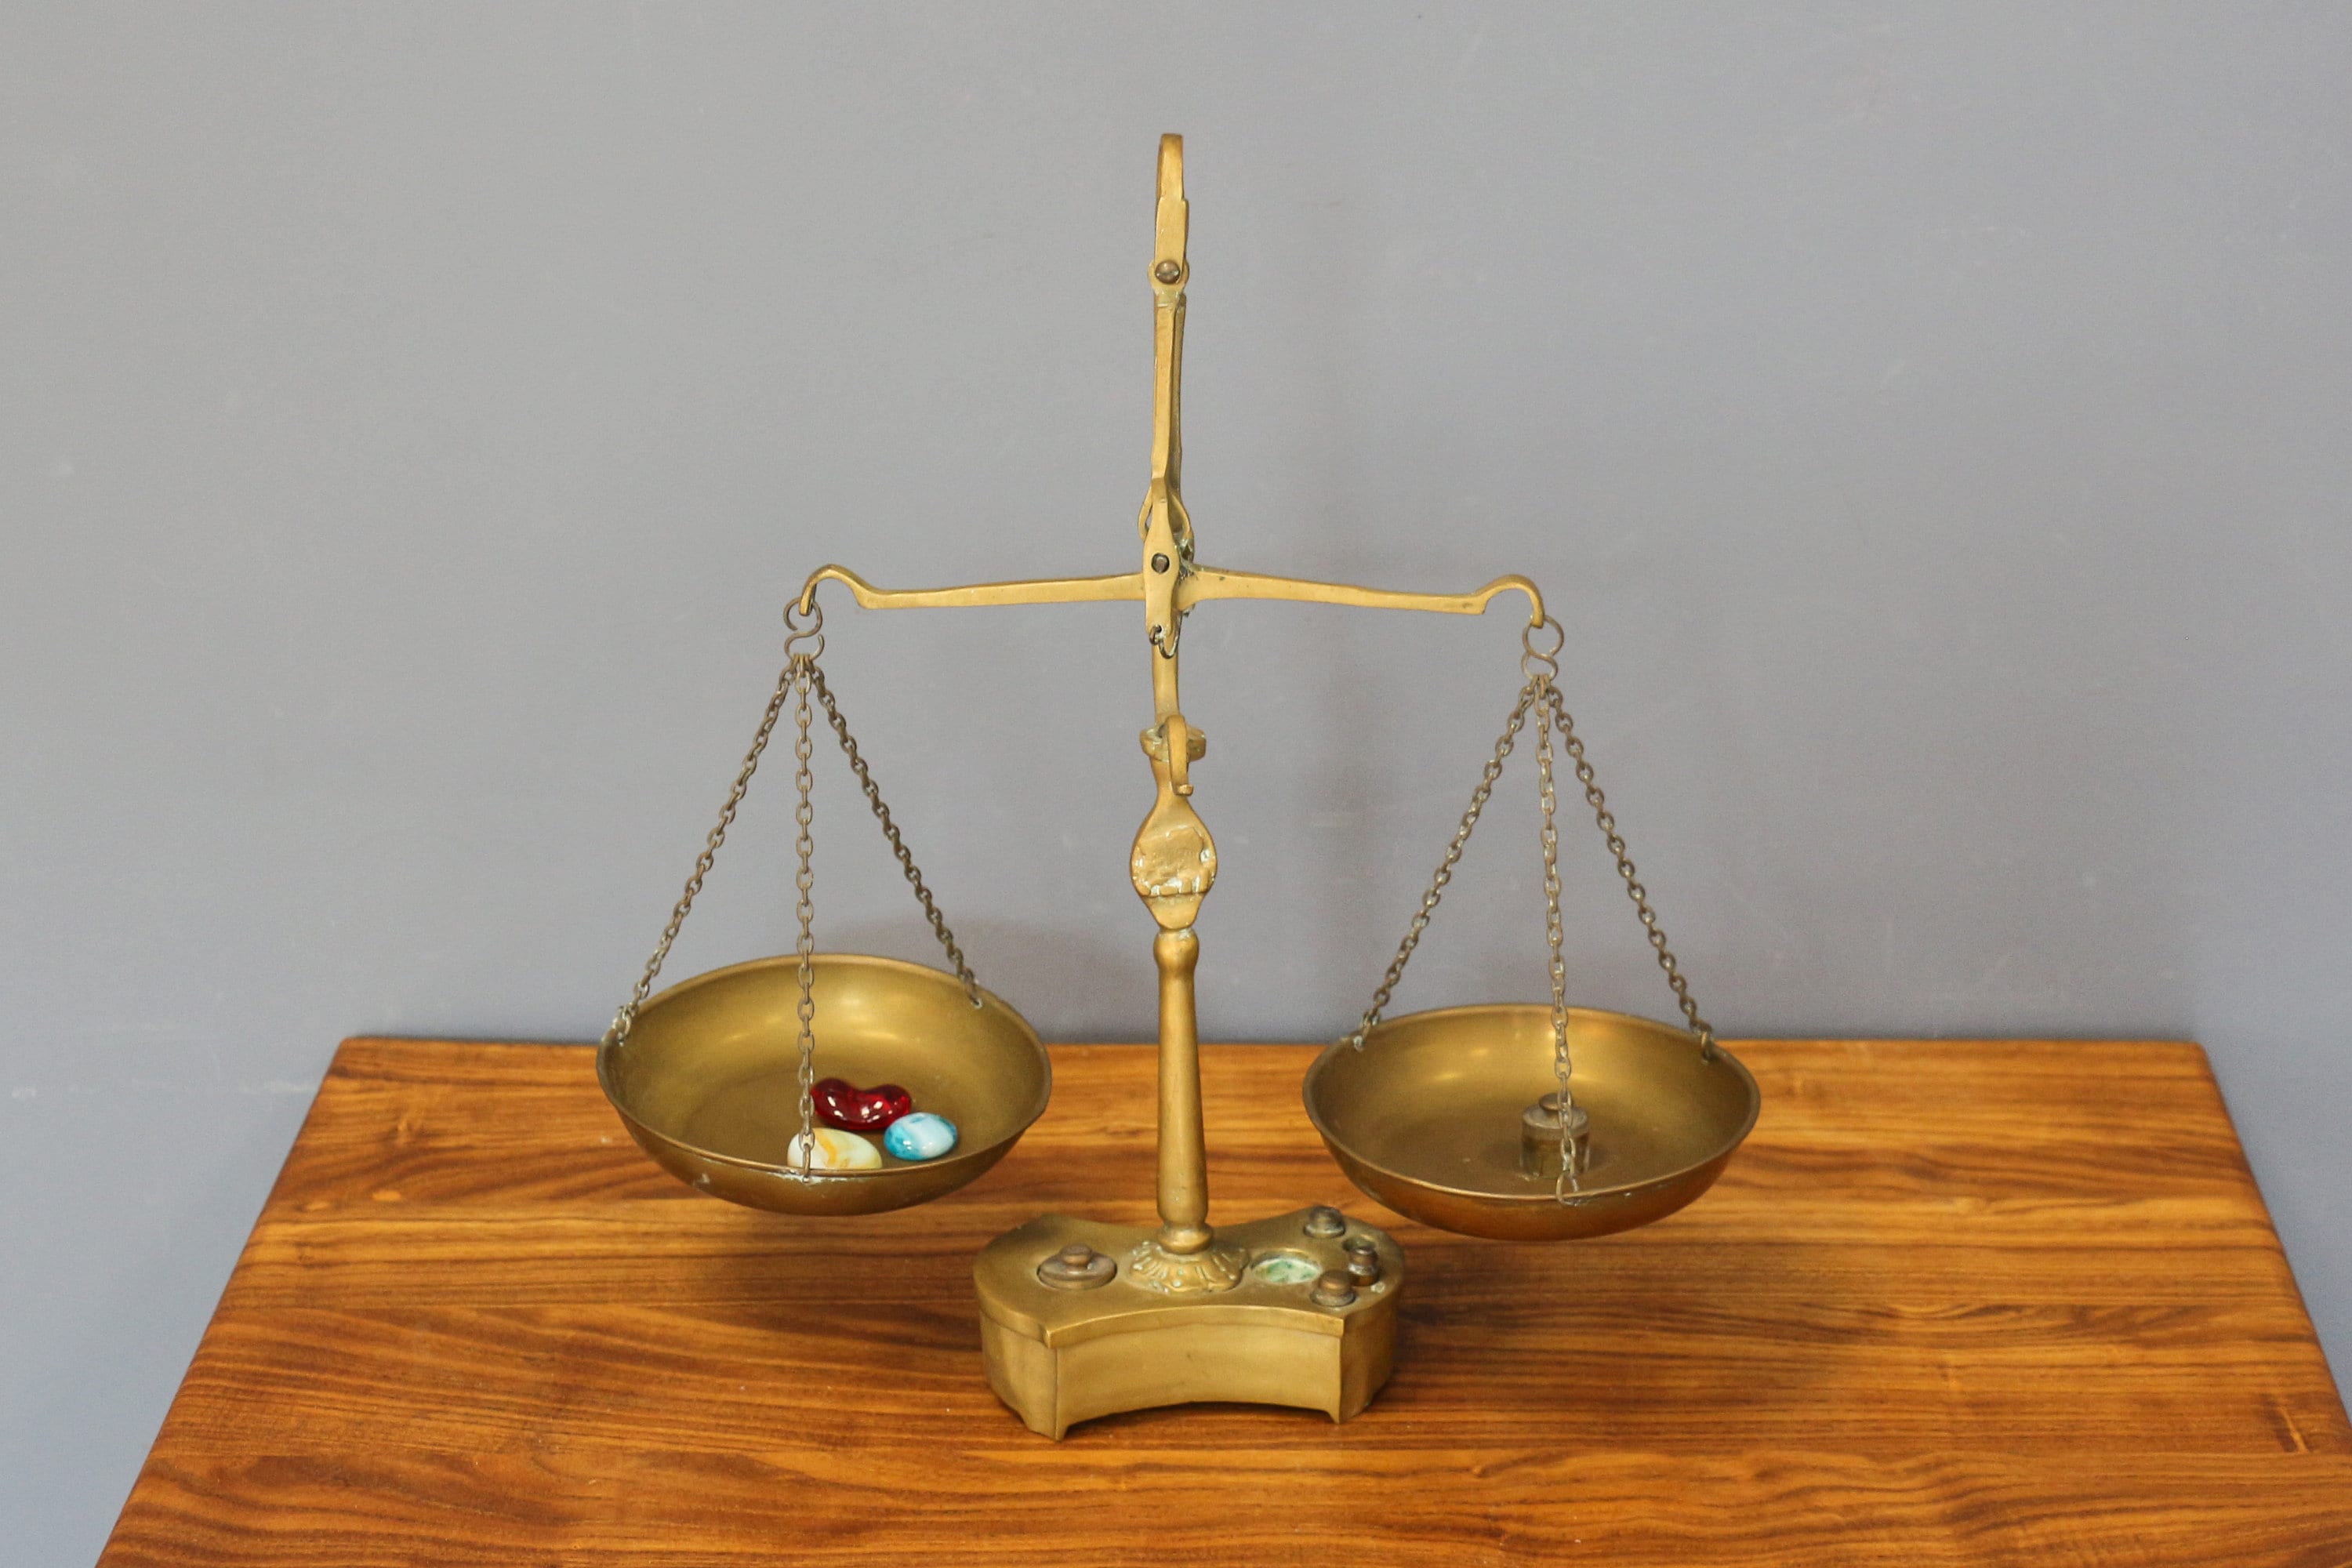 Vintage Brass Wood Decorative Libra Balance Justice Law Apothecary